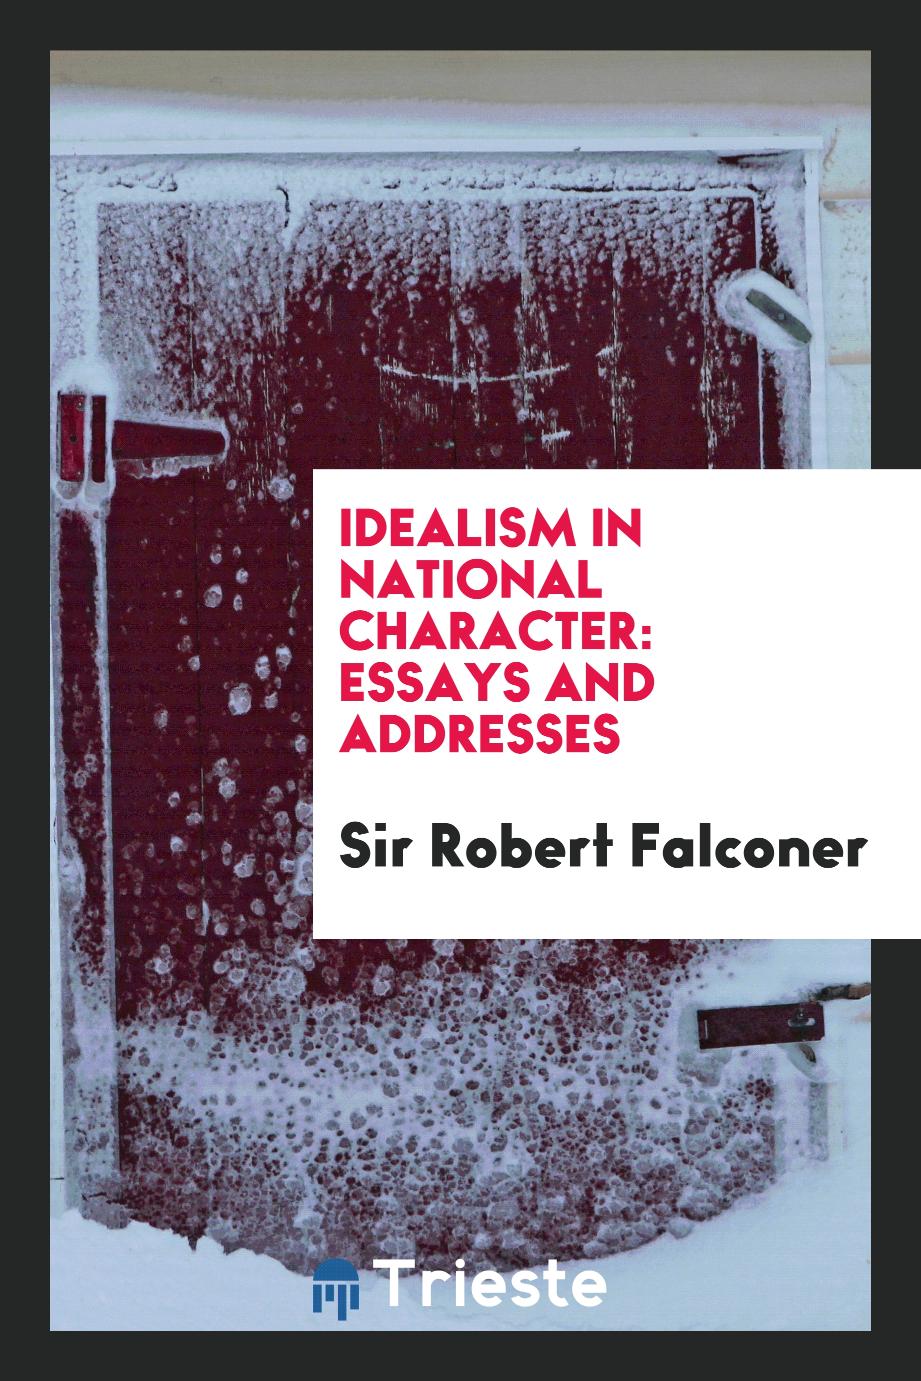 Idealism in national character: essays and addresses